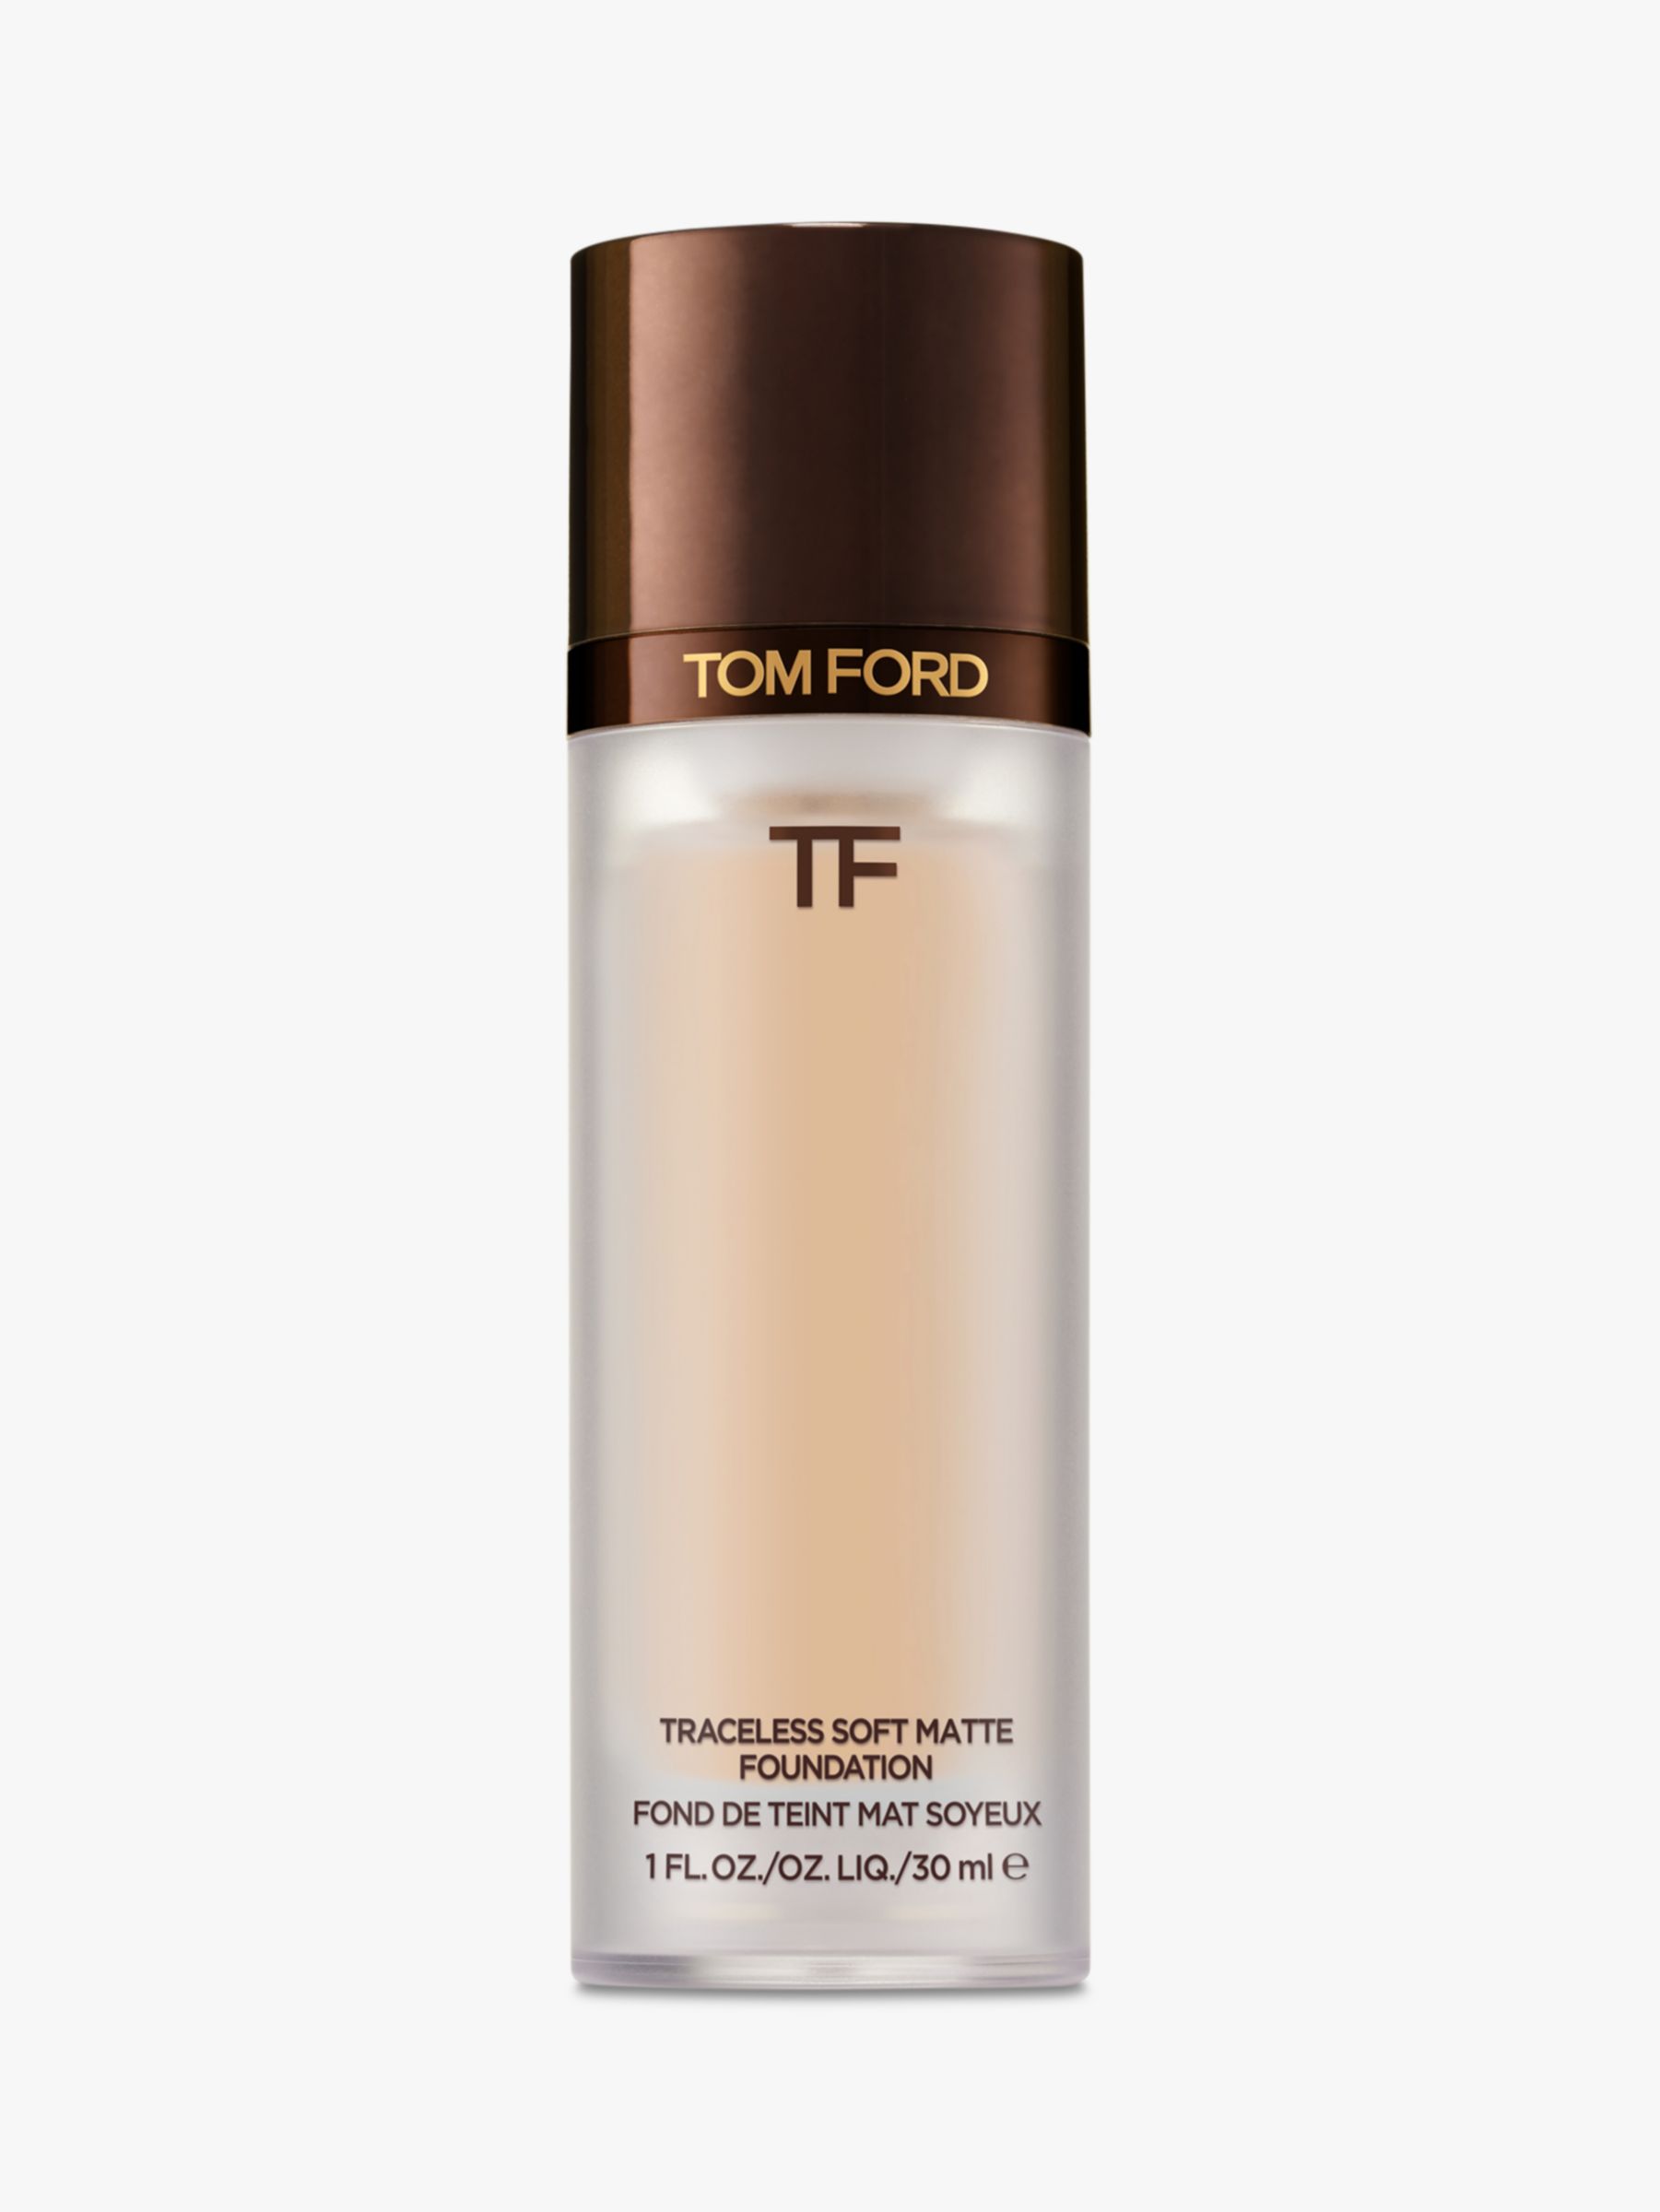 TOM FORD Traceless Soft Matte Foundation,  Buff at John Lewis & Partners